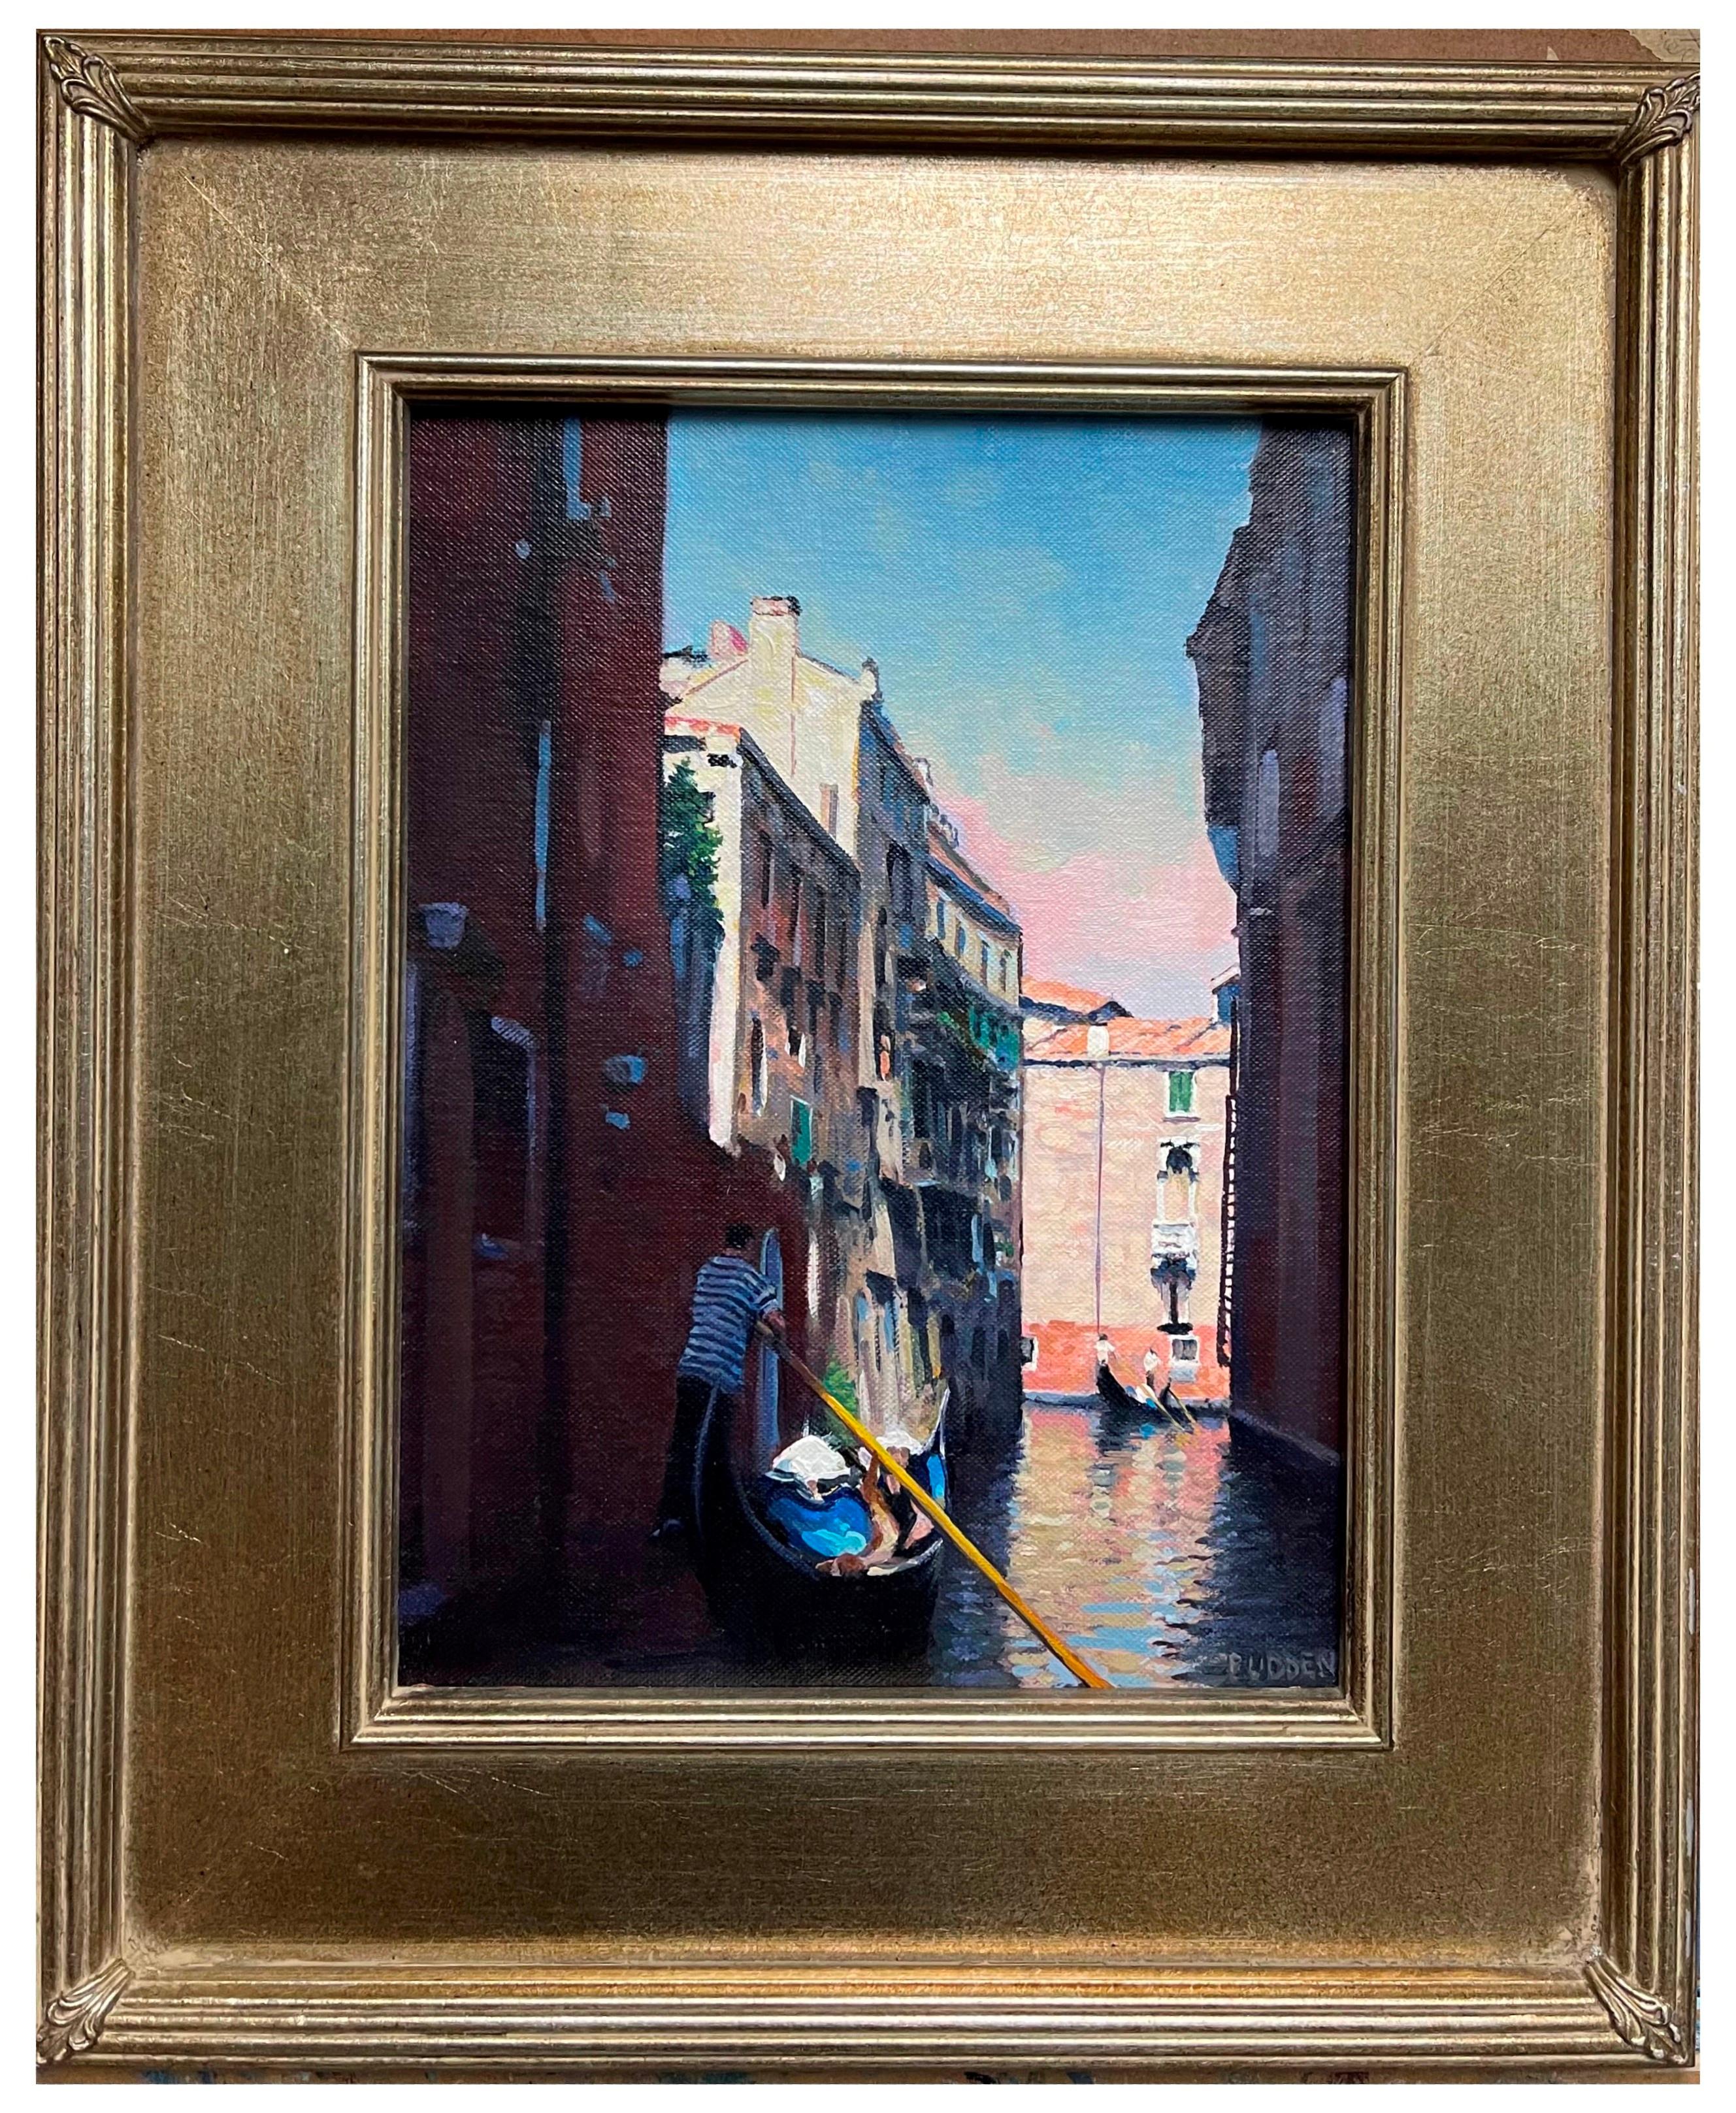 Beautiful Light, Venice
oil/panel
12 x 9 unframed, 17.5 x 14.5 framed
Beautiful Light, Venice is an oil painting on panel by award winning contemporary artist Michael Budden that showcases a wonderful scene rich in history. The viewer can enjoy the